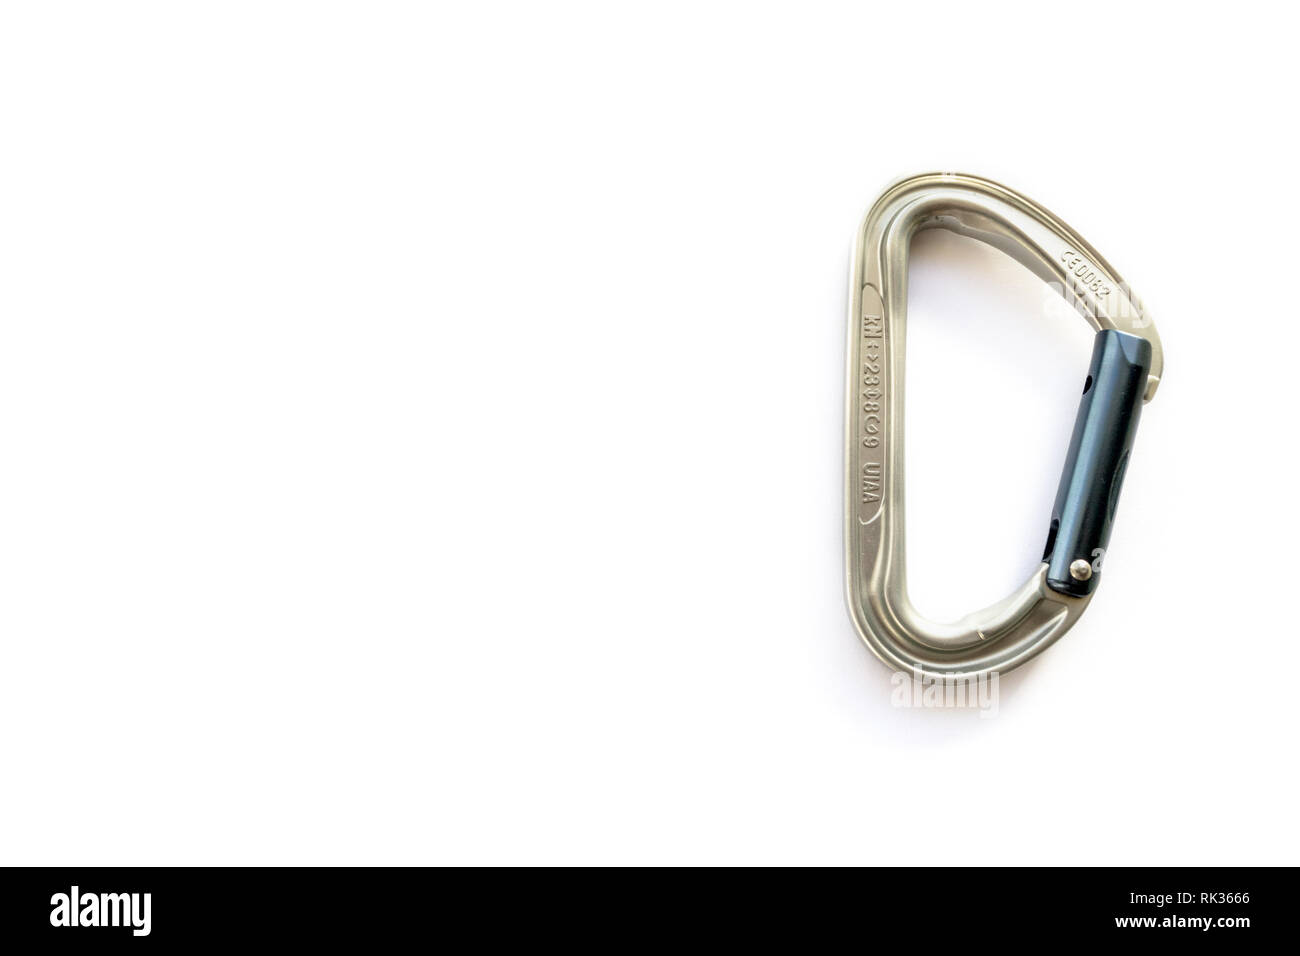 Silver solid straight gate carabiner with strength ratings, isolated on white background. Close up of non-locking binner, essential climbing gear Stock Photo